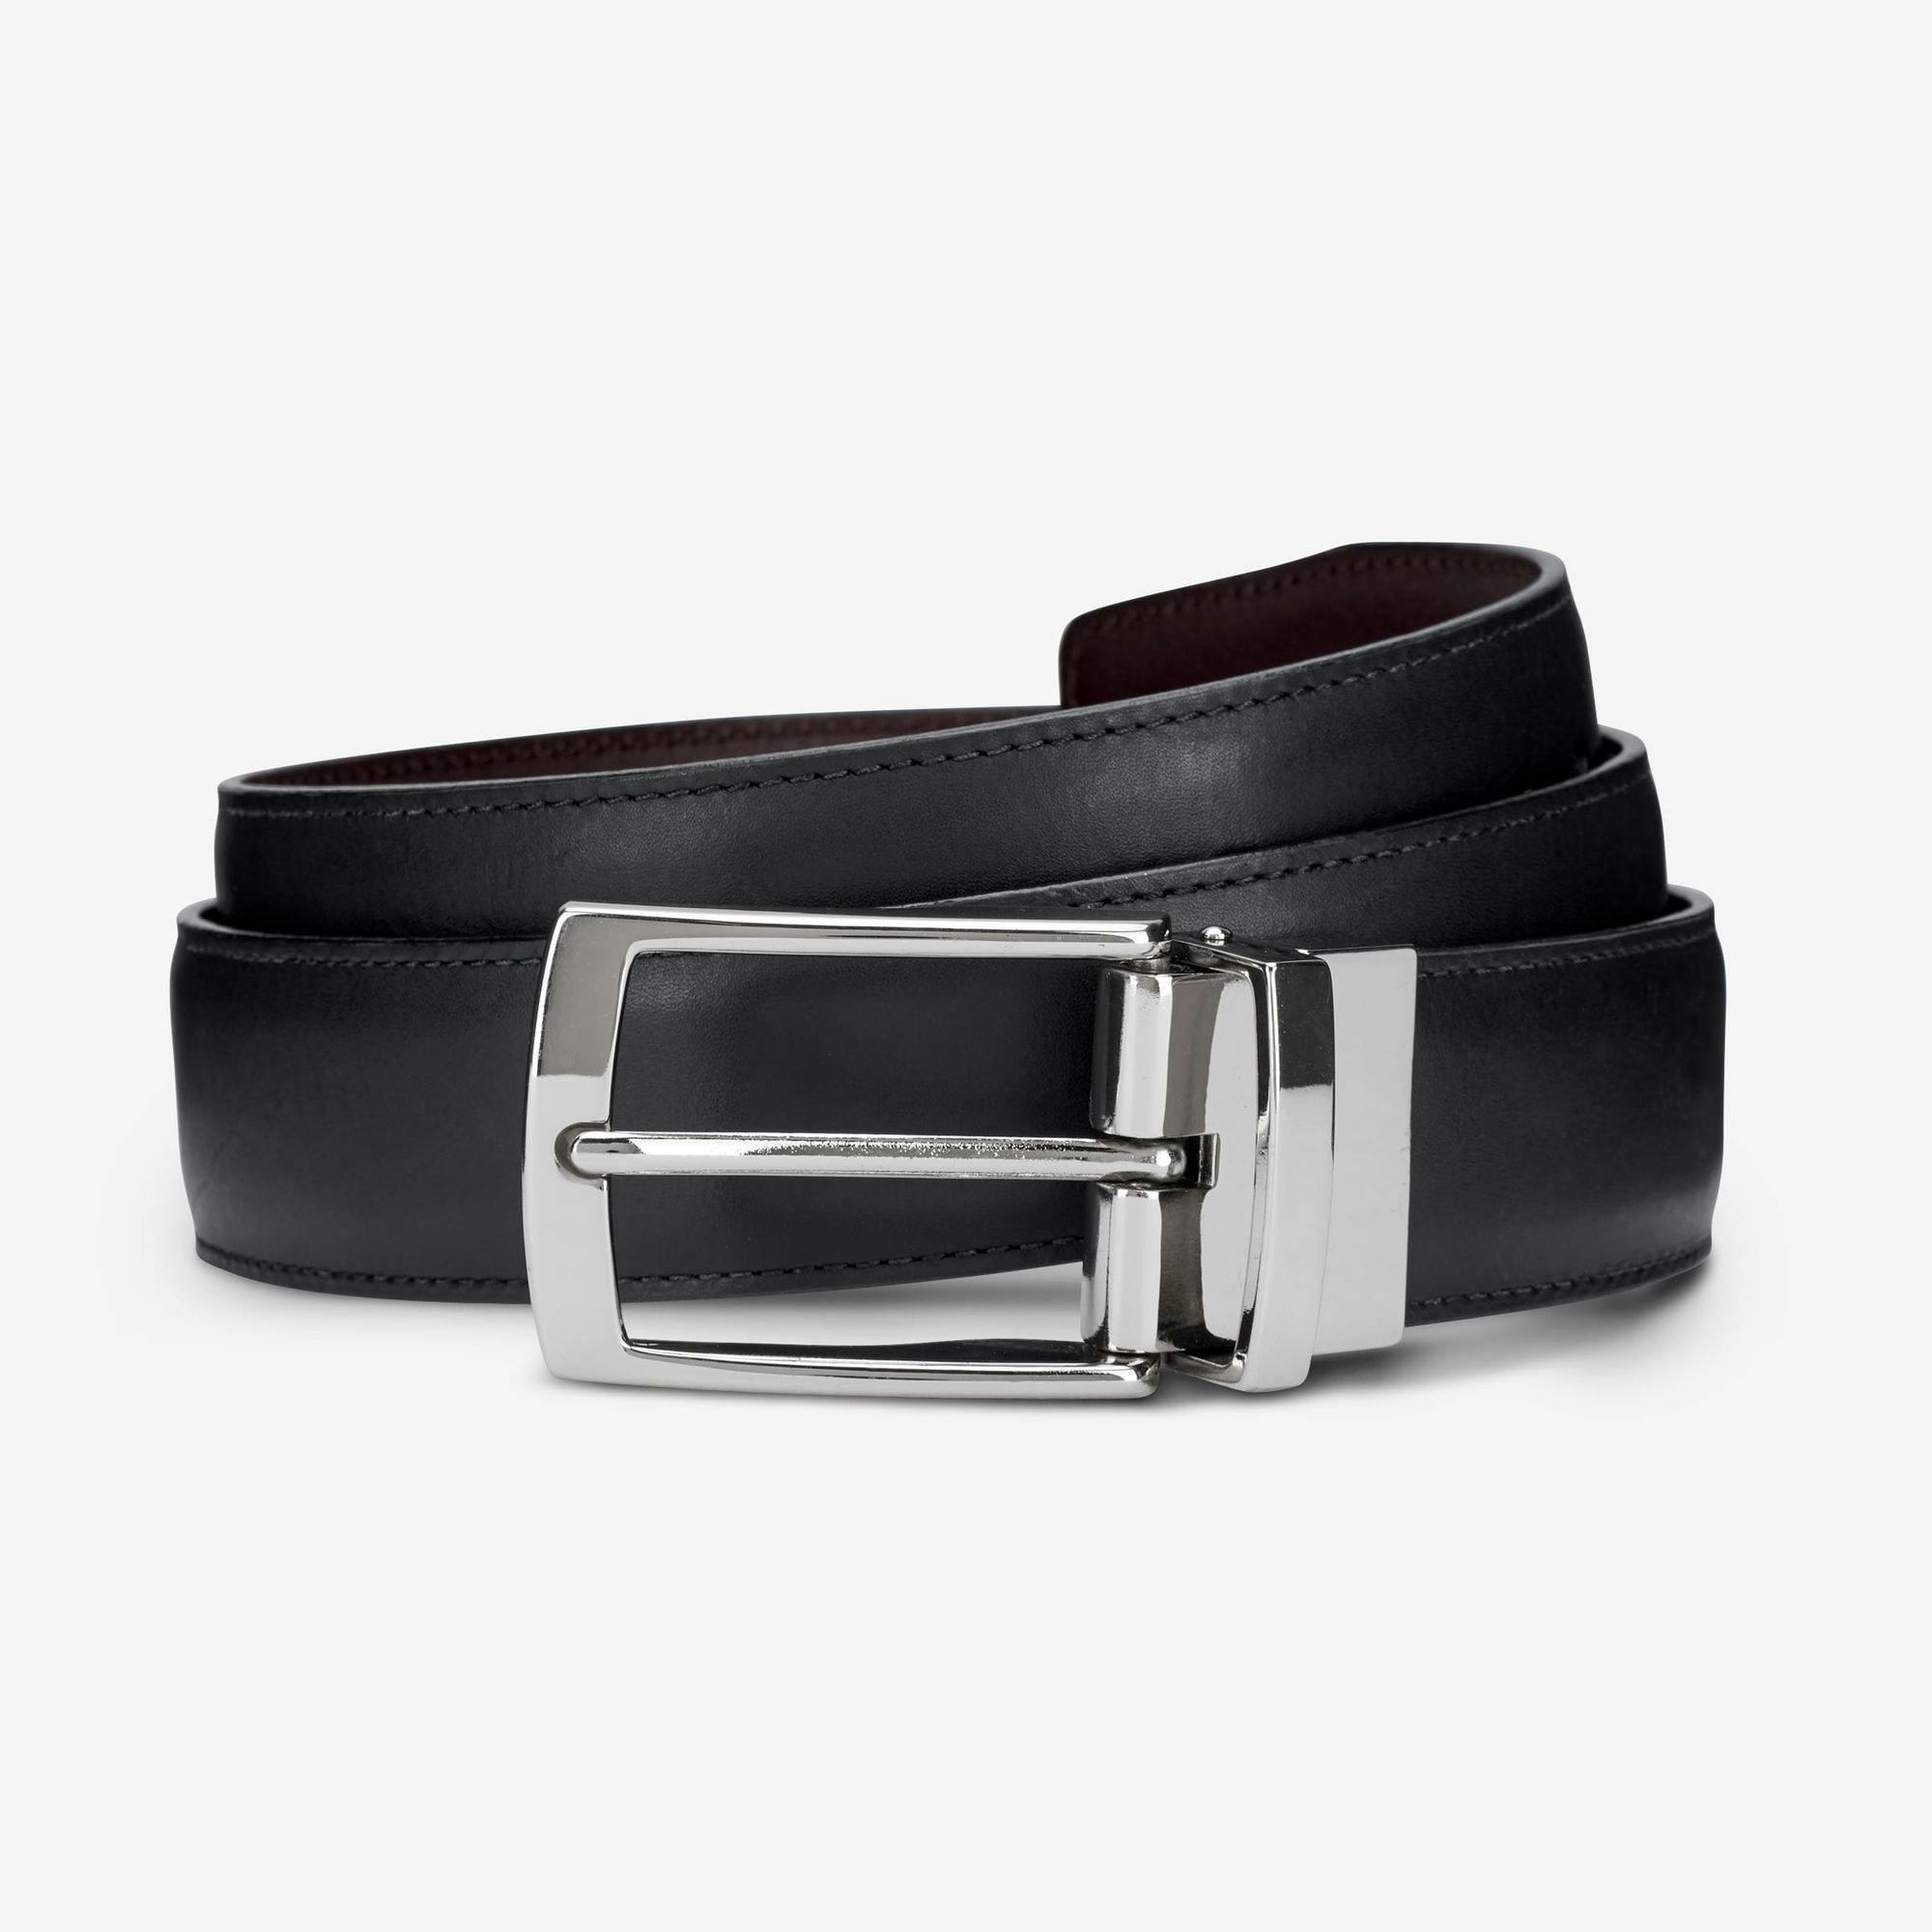 Best Men's Belts [March 2020] - Editor's Guide to the 12 Best Belts of 2019